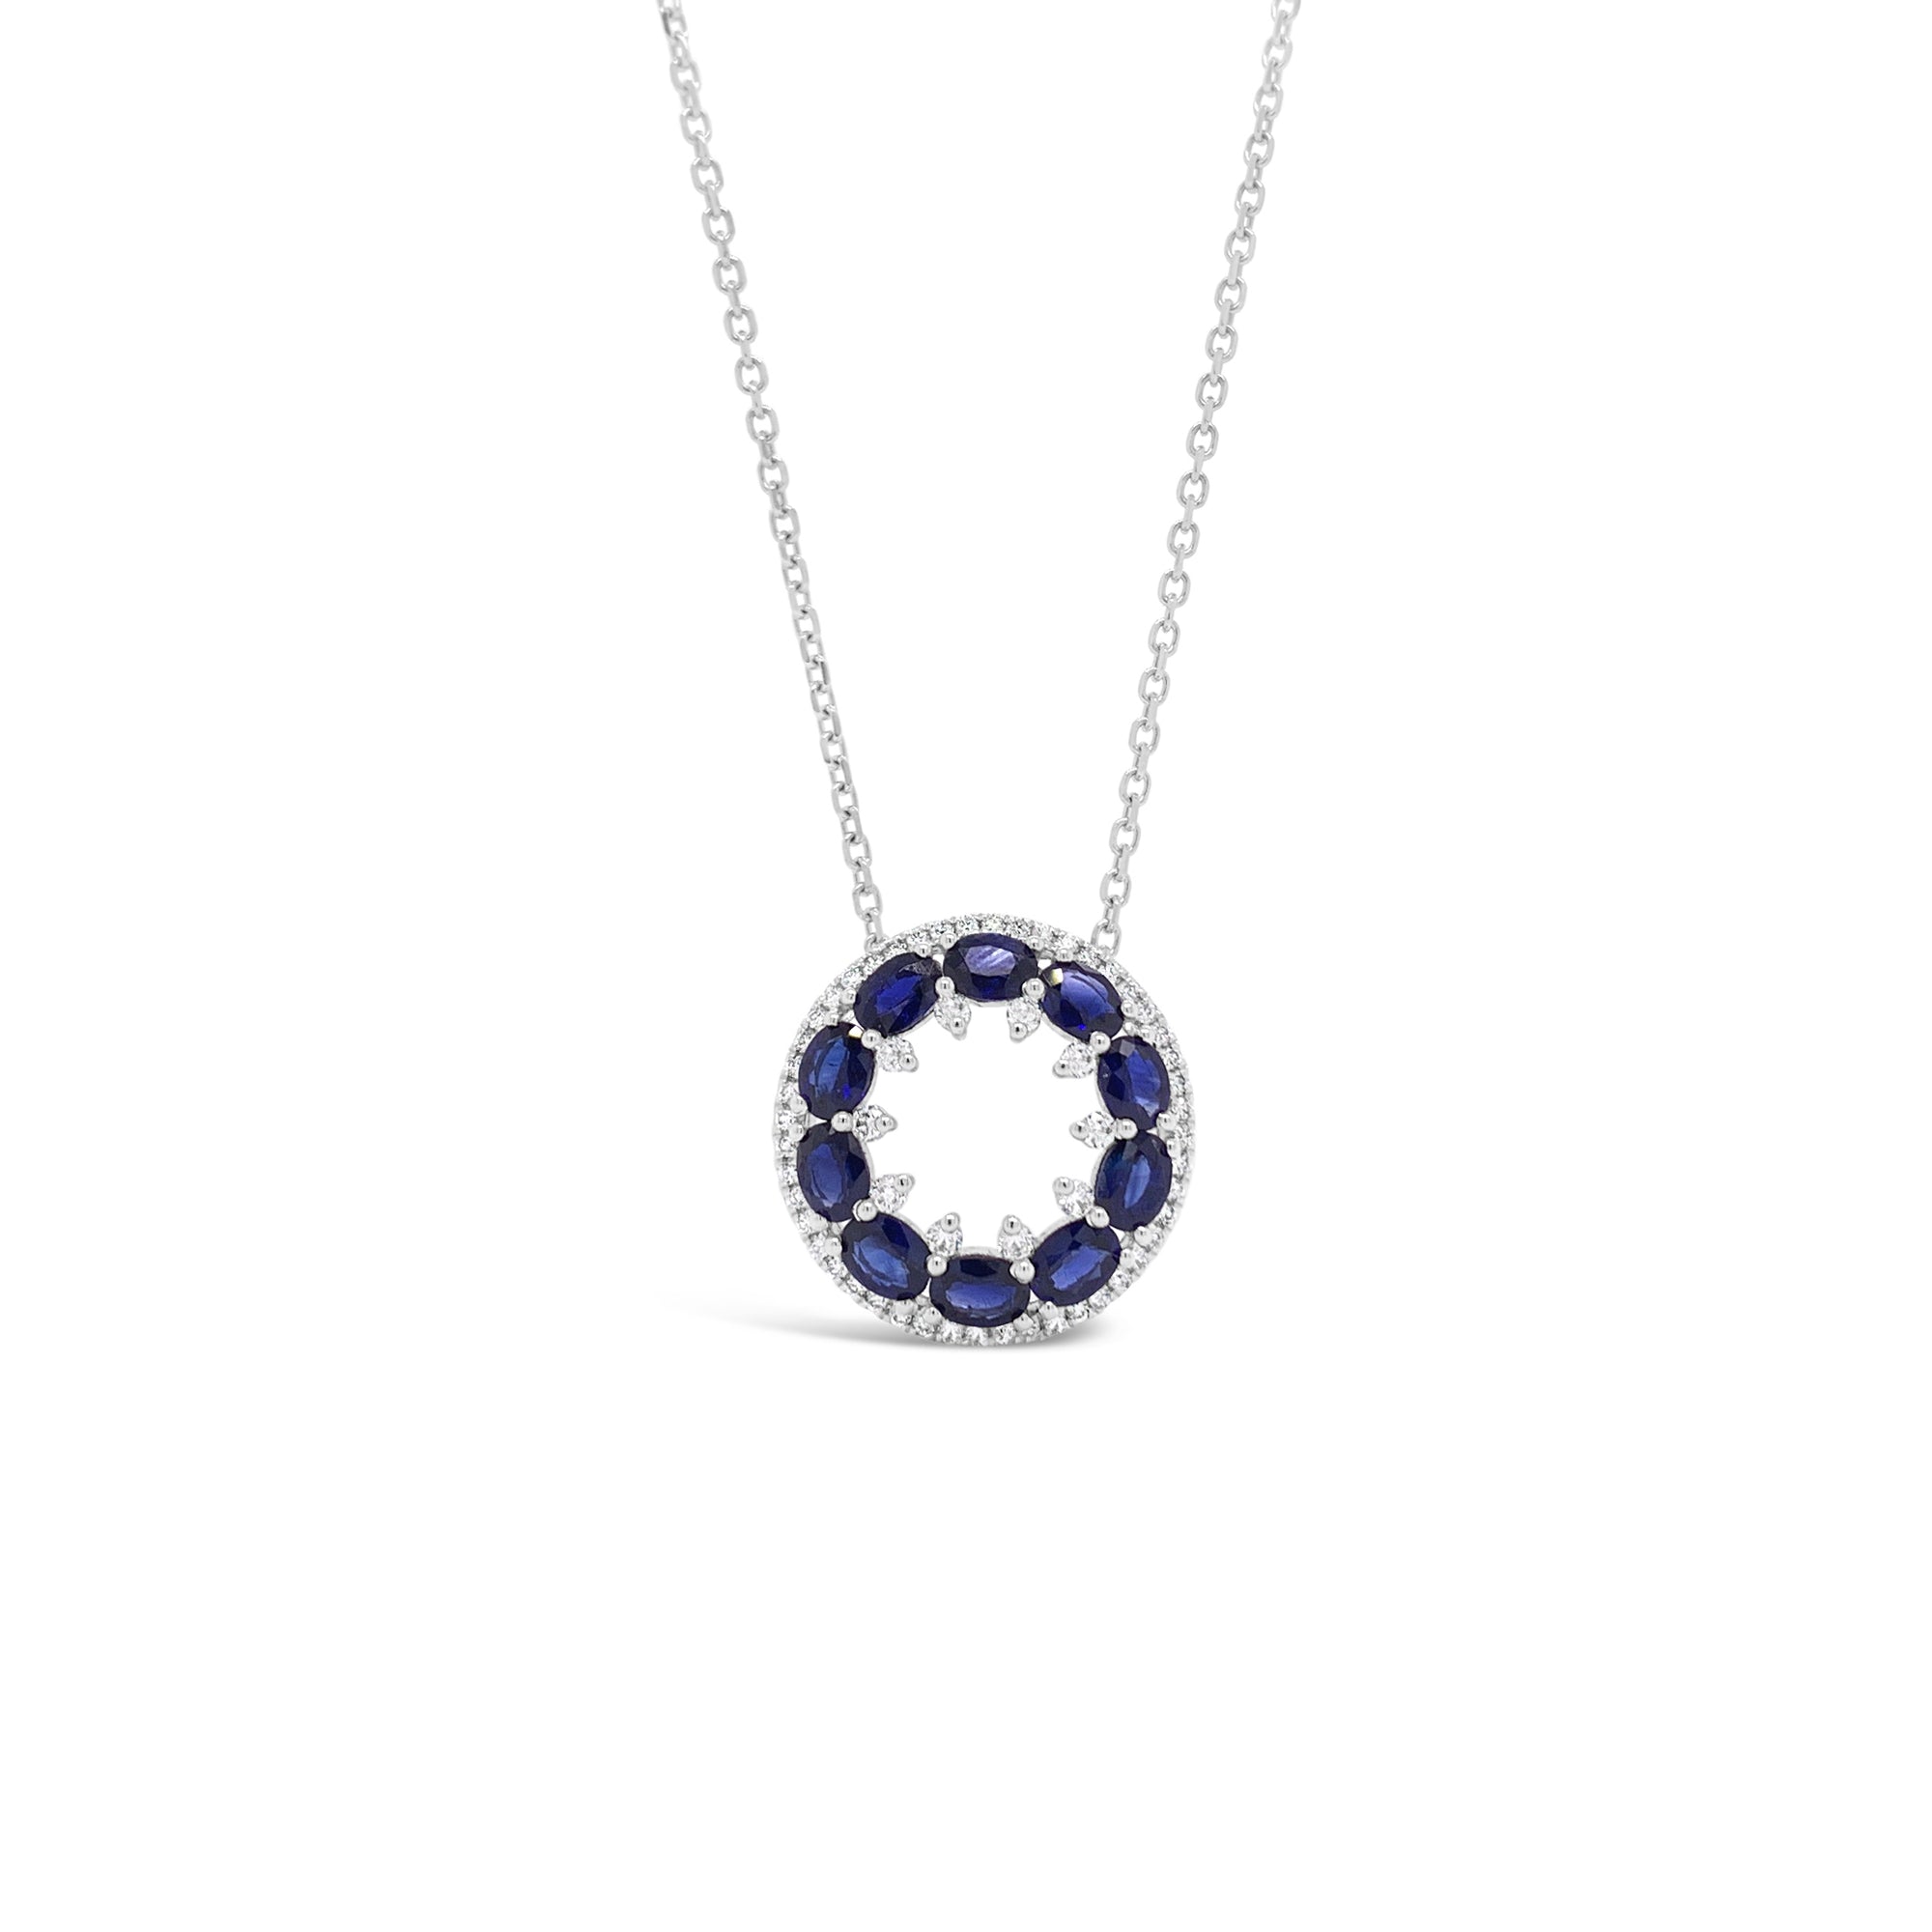 Sapphire & Diamond Circle Pendant Necklace -10 oval-shaped sapphires totaling 2.06 carats -58 round diamonds totaling 0.29 carats